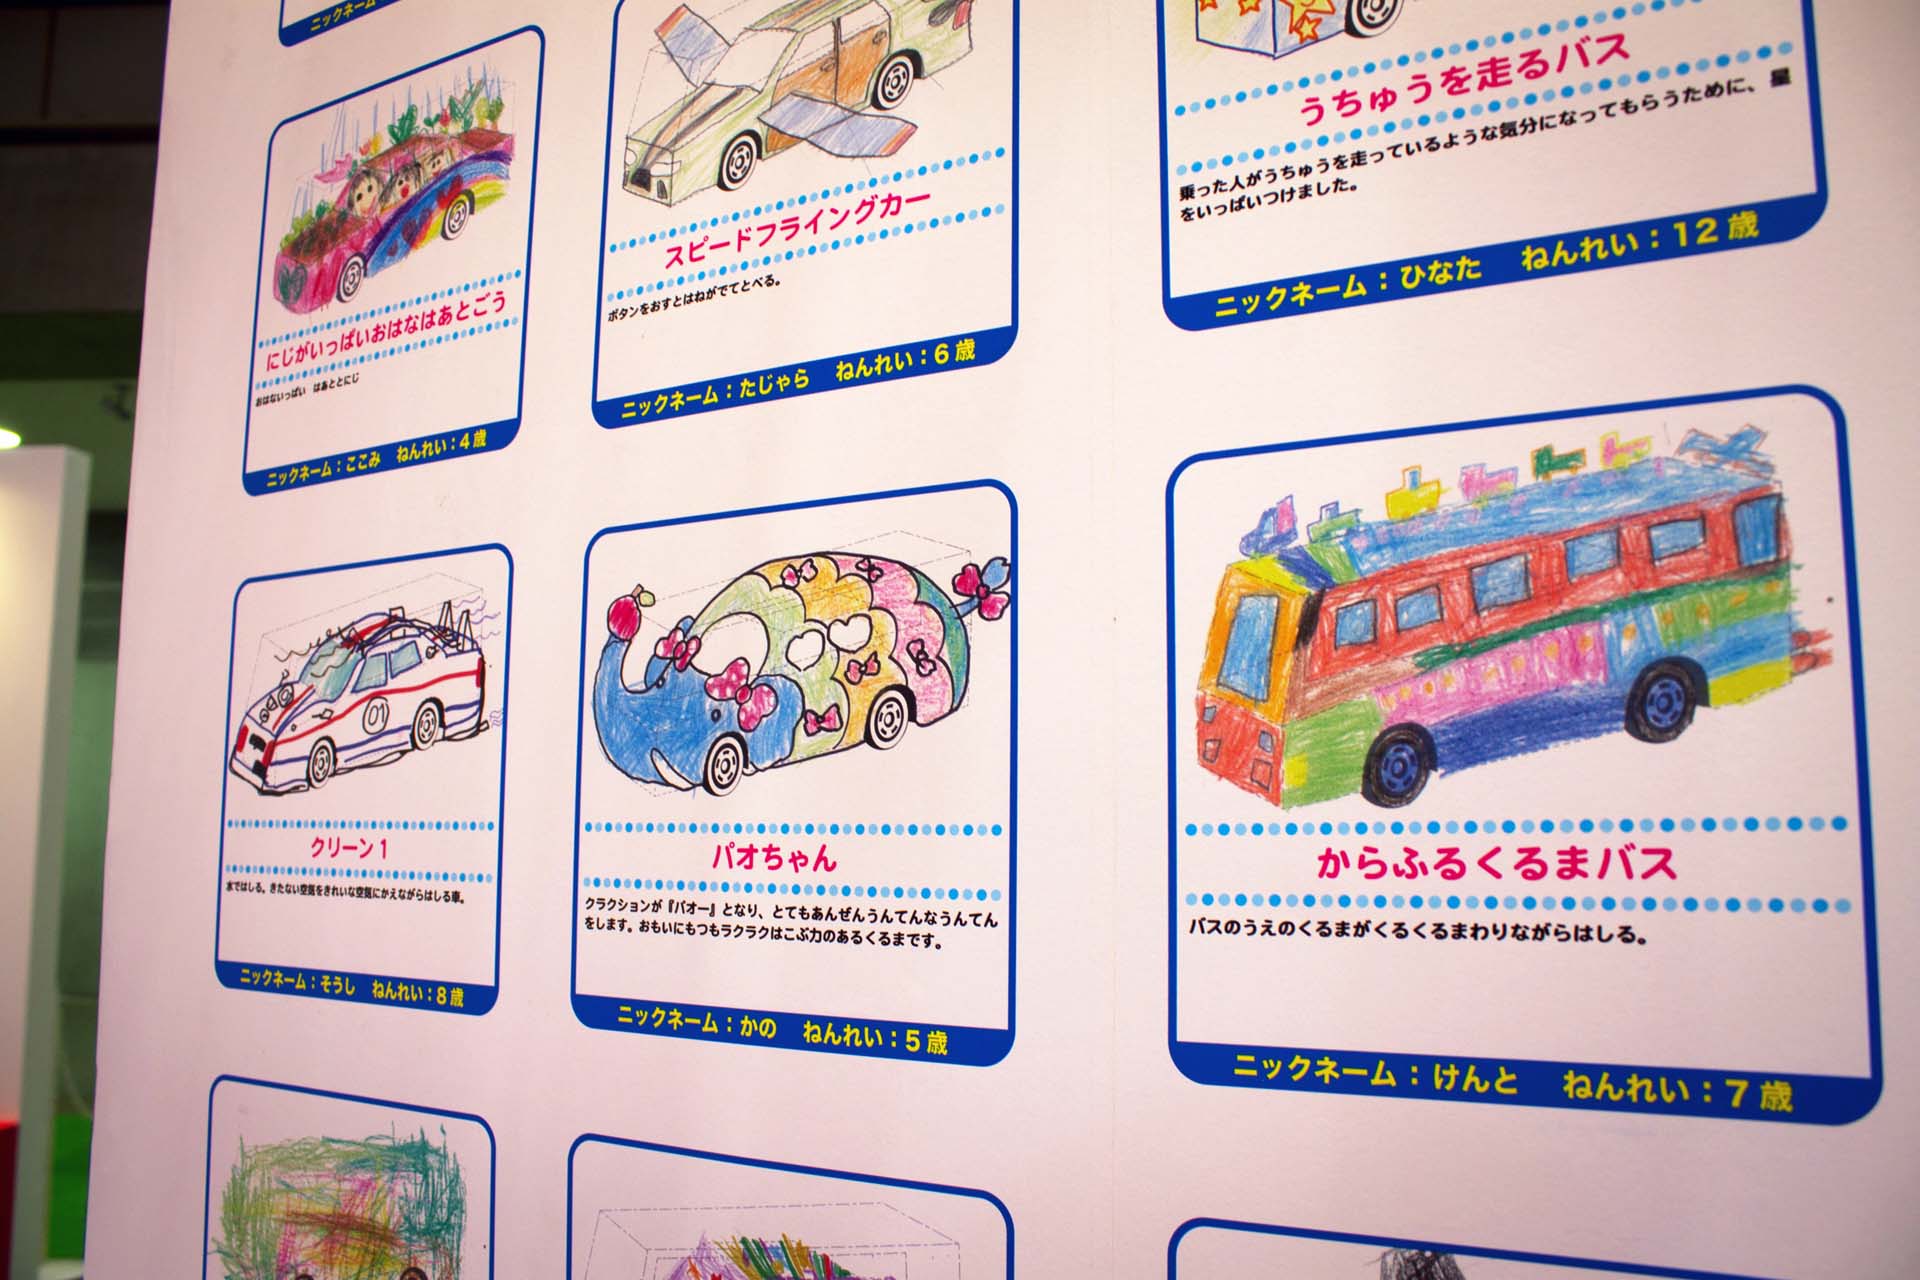 While Tomica's more expensive and realistic models are intended to appeal to the adult collector, they're still very much a kid-oriented brand. At their Toyko Motor Show booth, huge pillars were festooned with drawings of the dream-cars of Japanese youngsters.